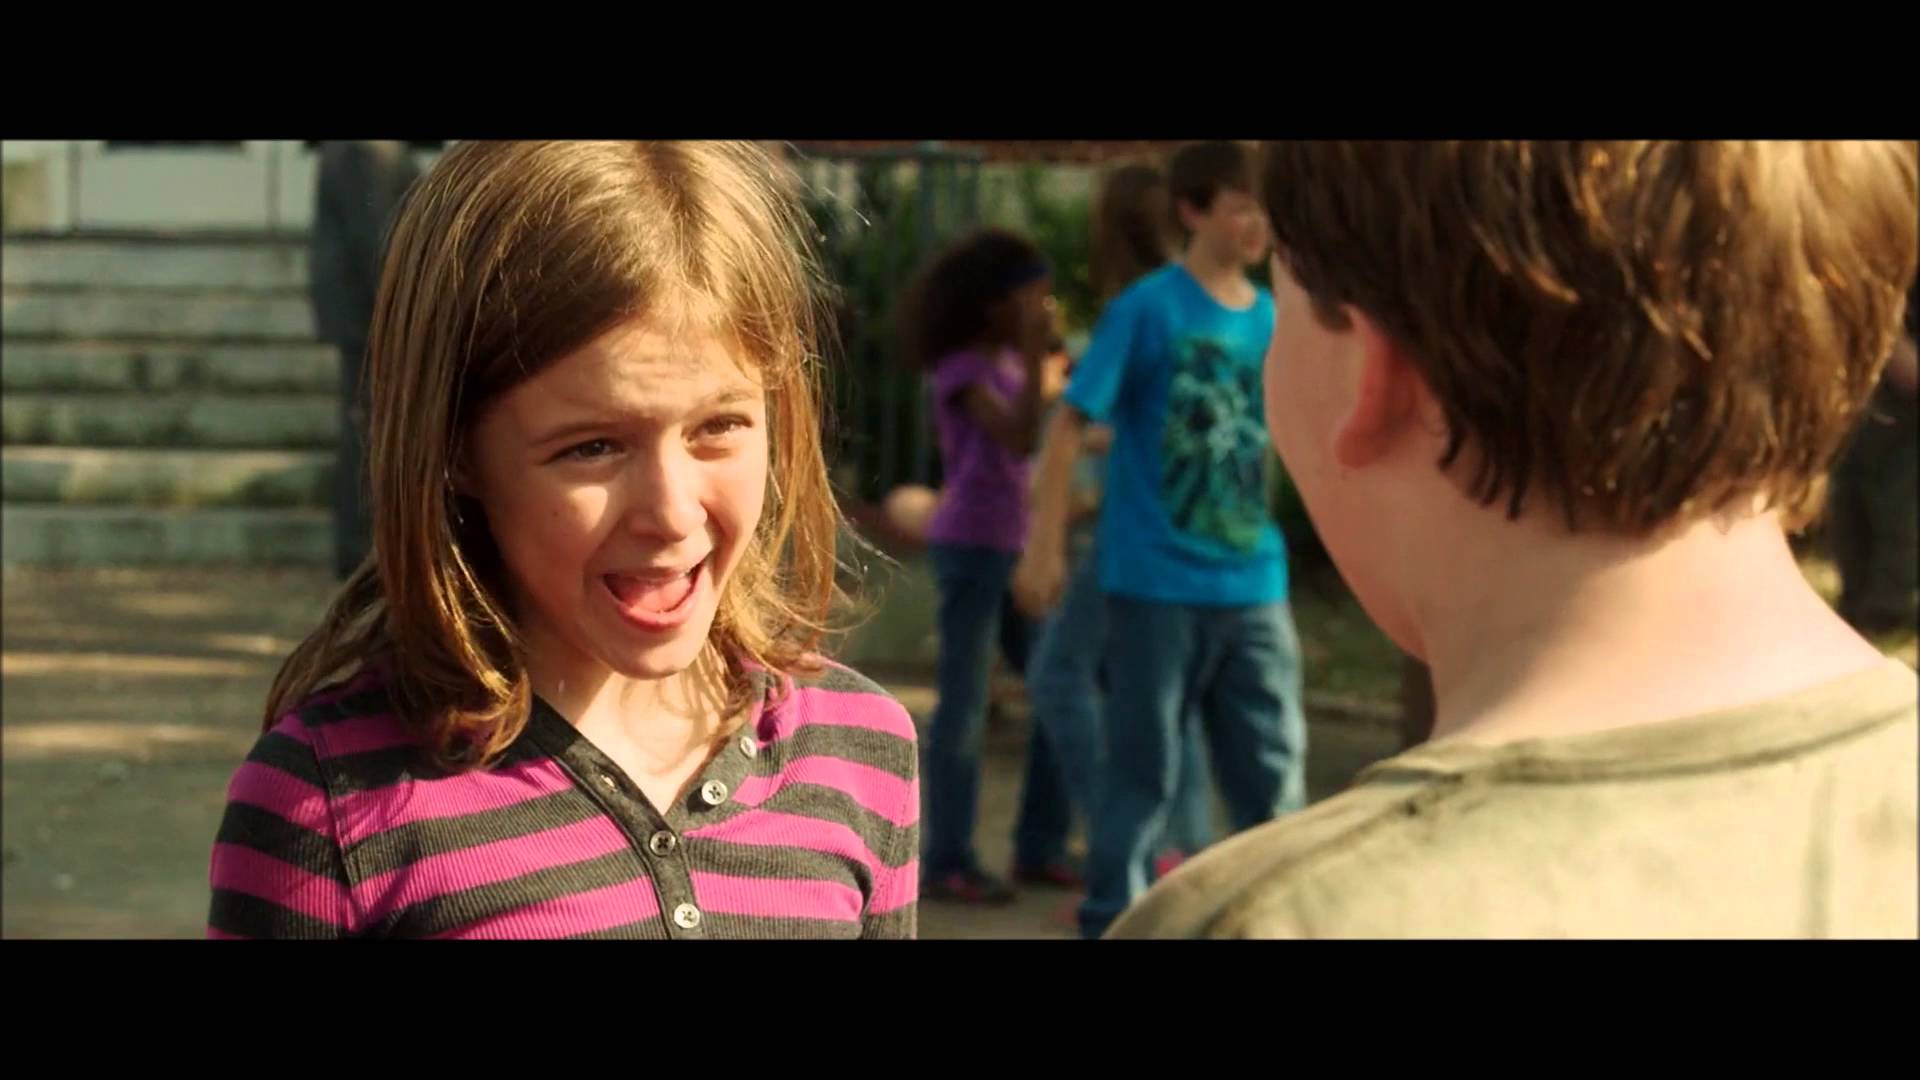 BULLYING : The best scene ever where a little girl defends herself ...